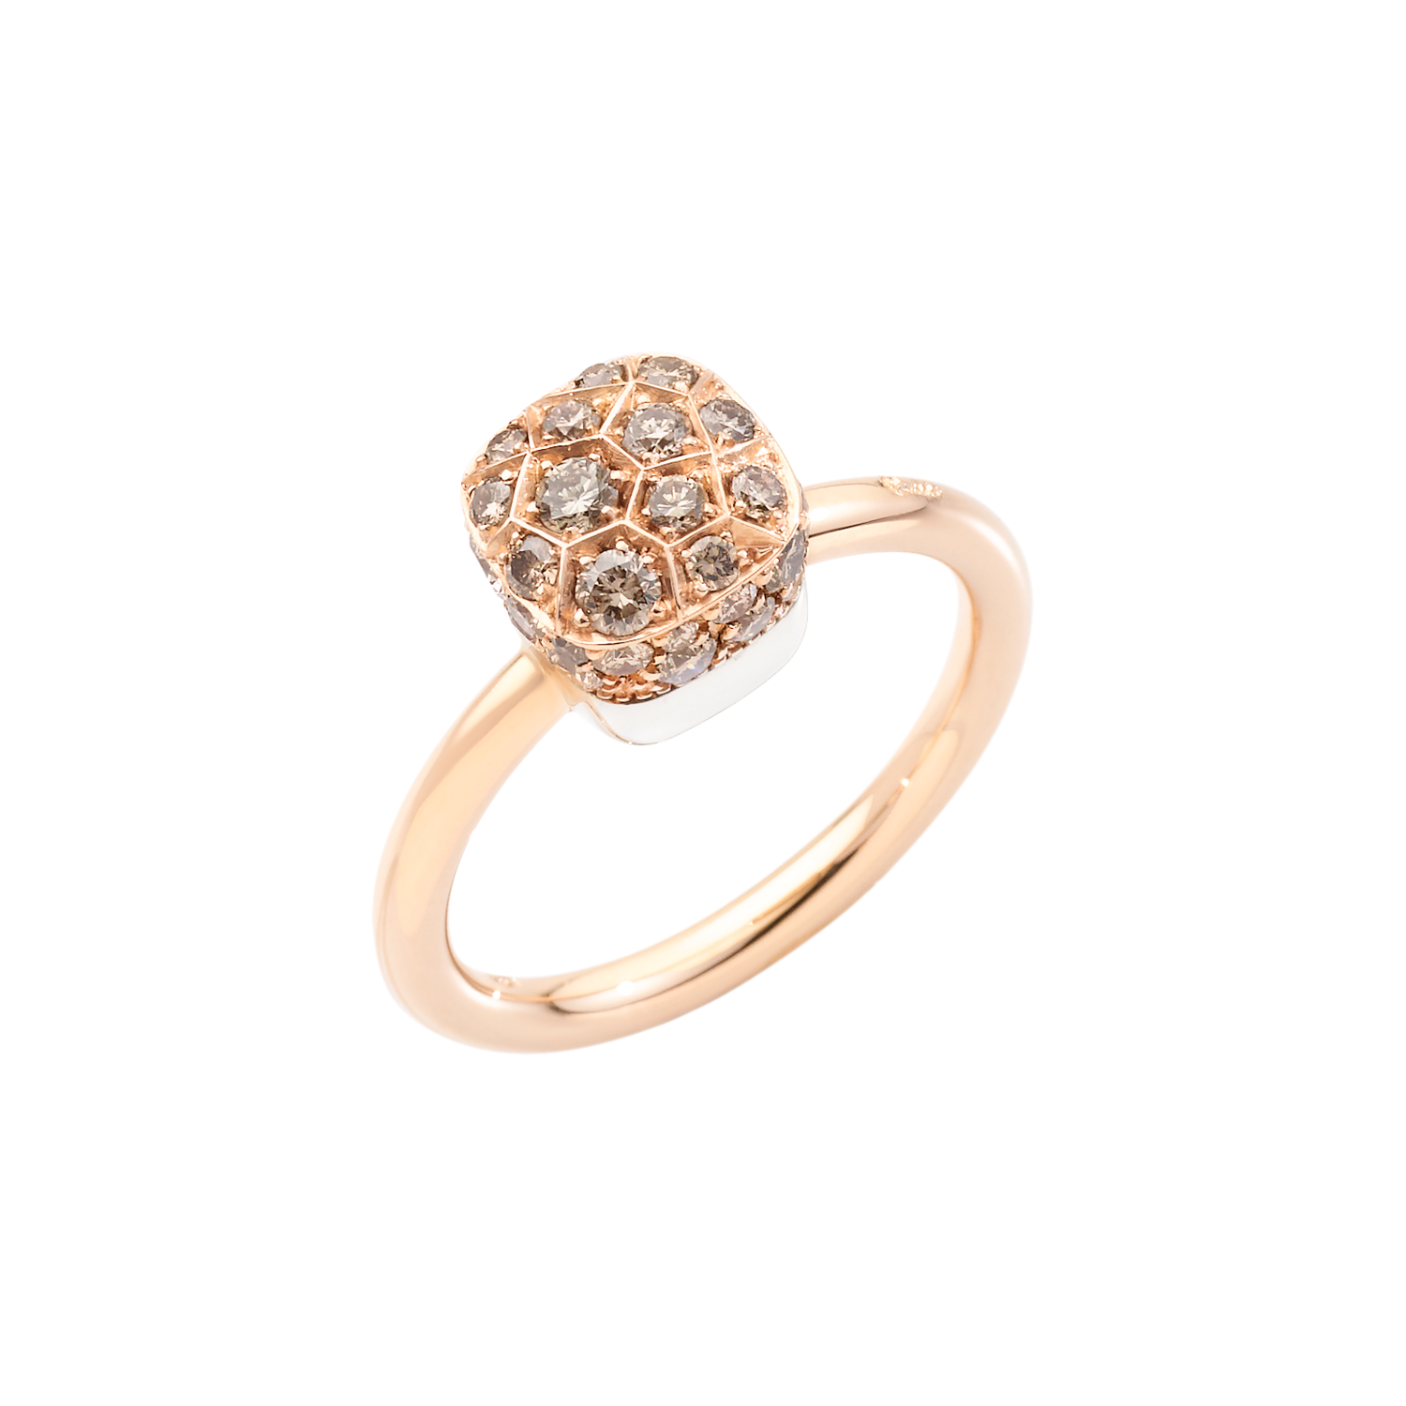 PAC2501_O6000_DBR00_010_Pomellato_ring-nudo-solitaire-petit-white-gold-18kt-rose-gold-18kt-brown-diamond.png